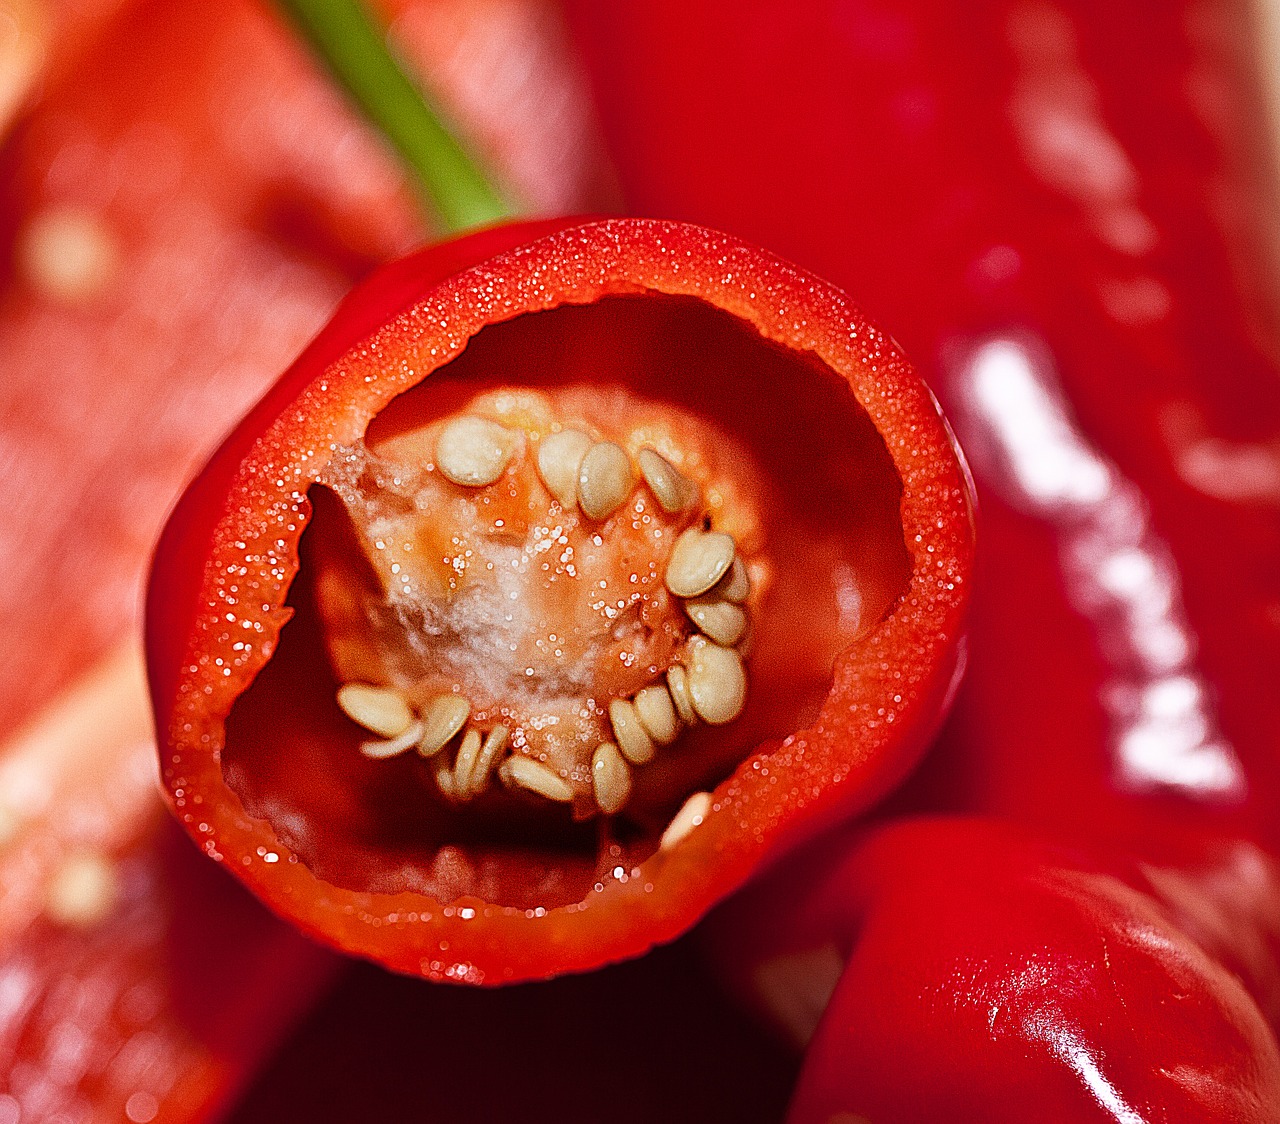 paprika fruit the inside of the peppers free photo